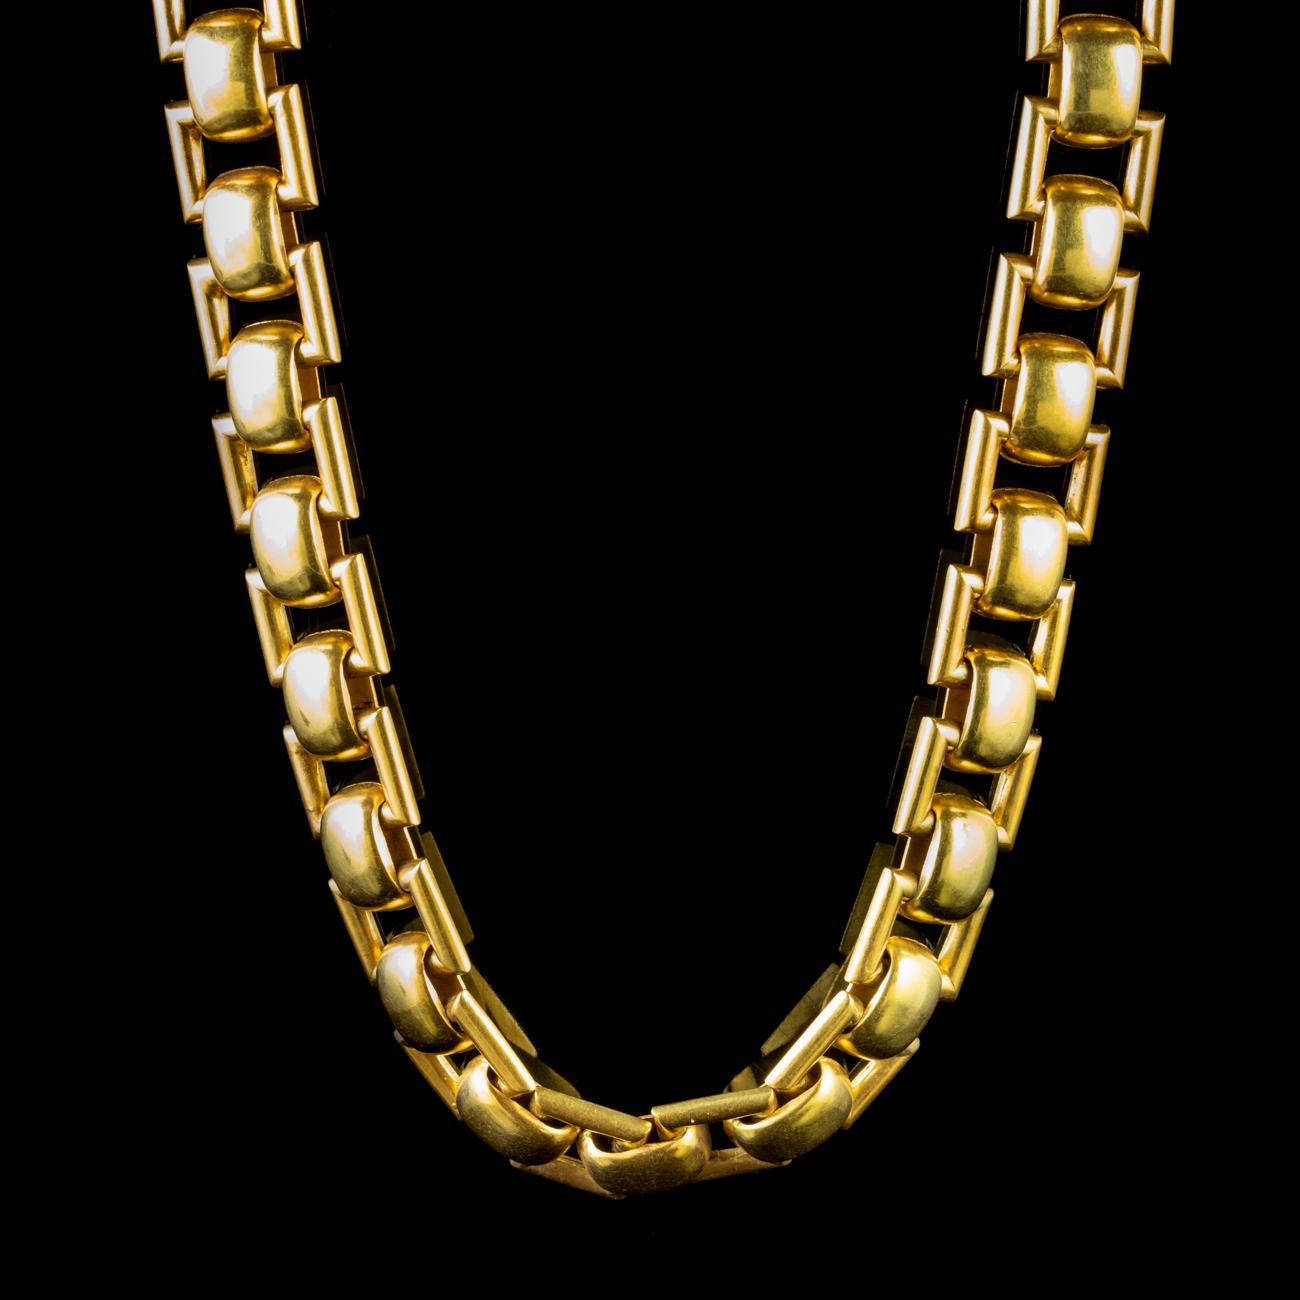 This stunning Victorian book collar link chain is crafted in Silver and gilded in 18ct Yellow Gold. 

The alternating square and curved links shine brightly, and interlock to form a smooth back which makes it extremely comfortable when worn. The